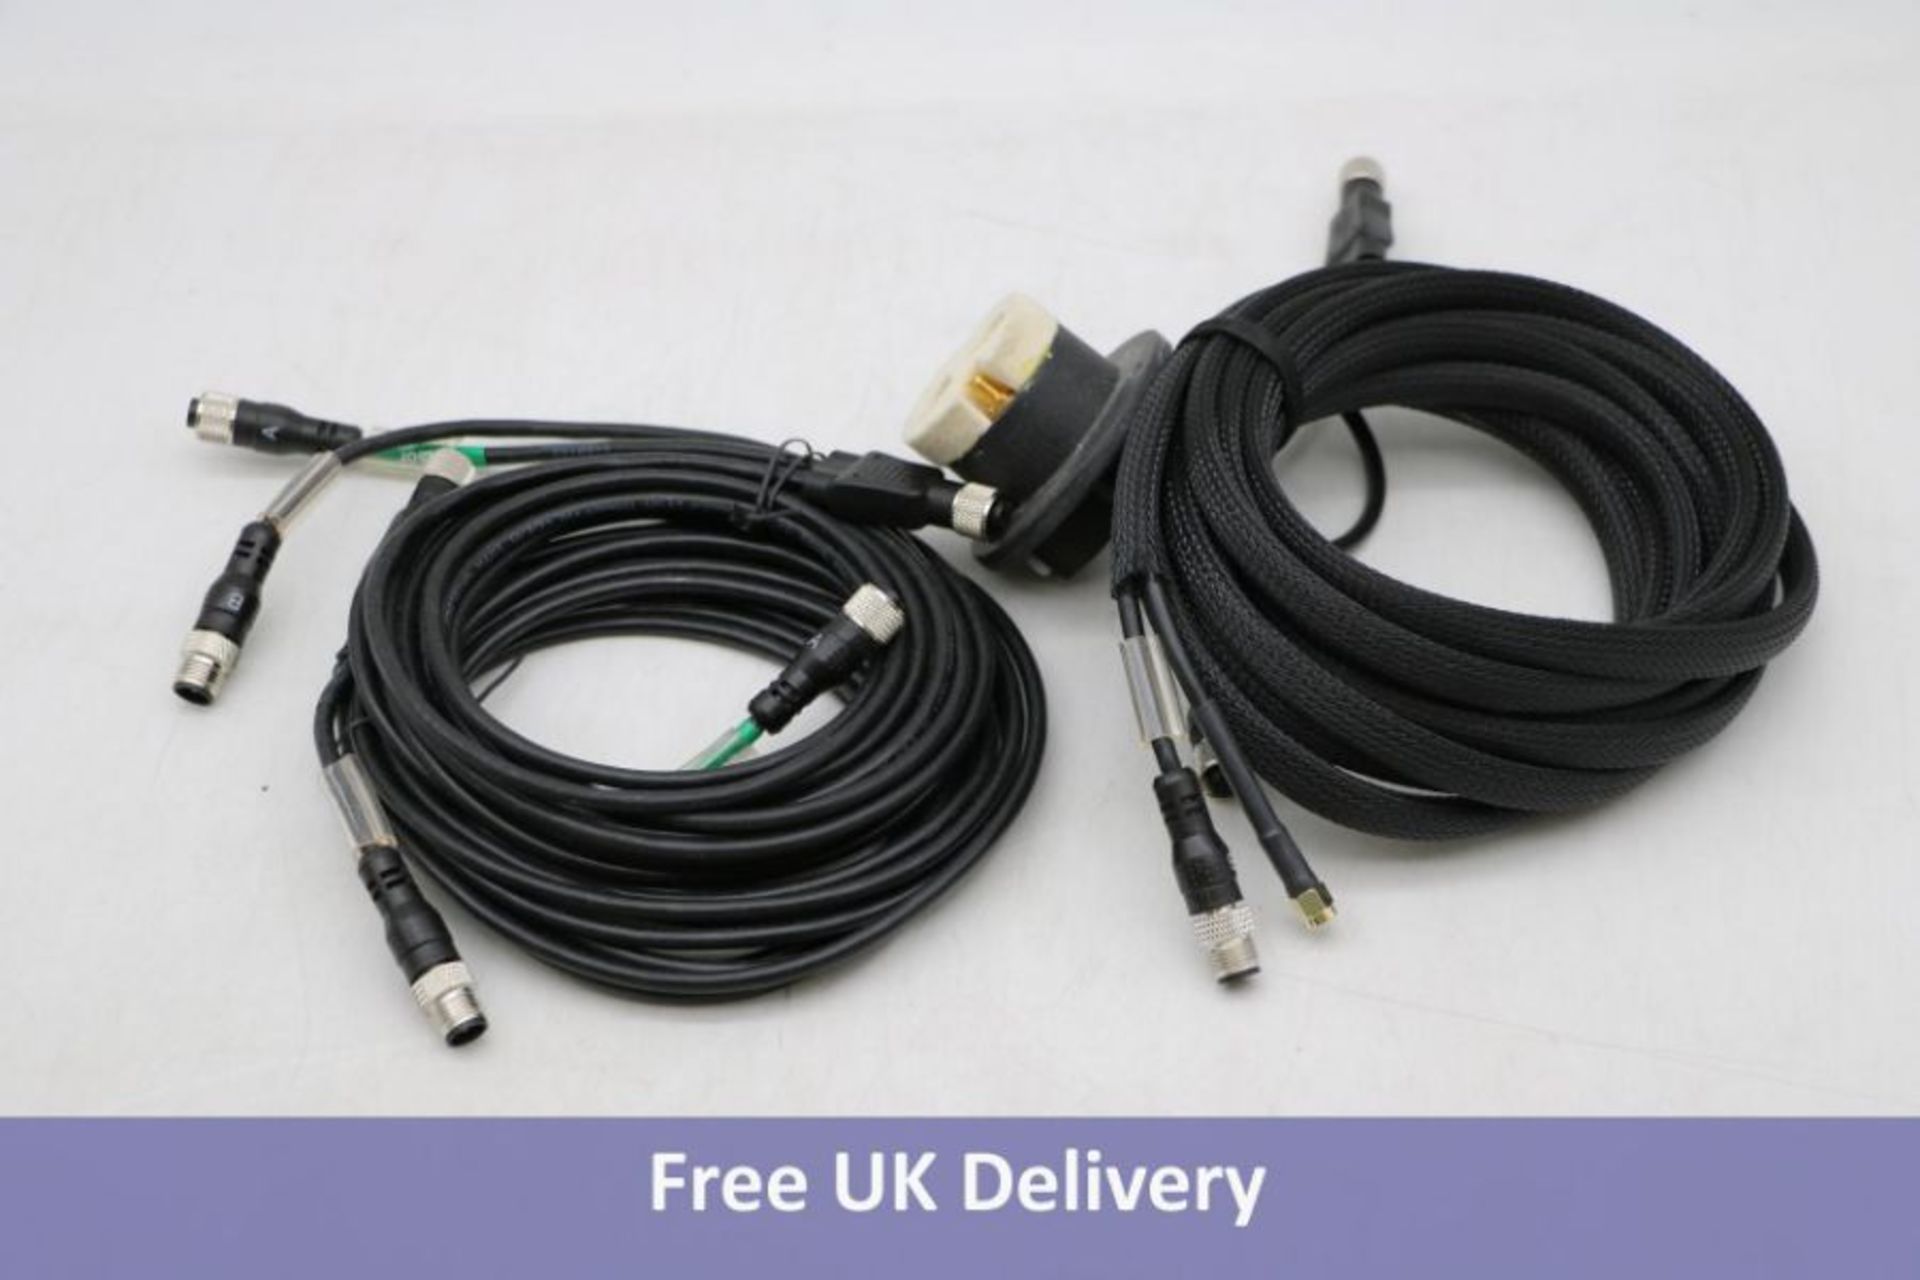 Two Batlogger X items to include 1x Microphone Cable 5M and 1x Sensor Cable, Black